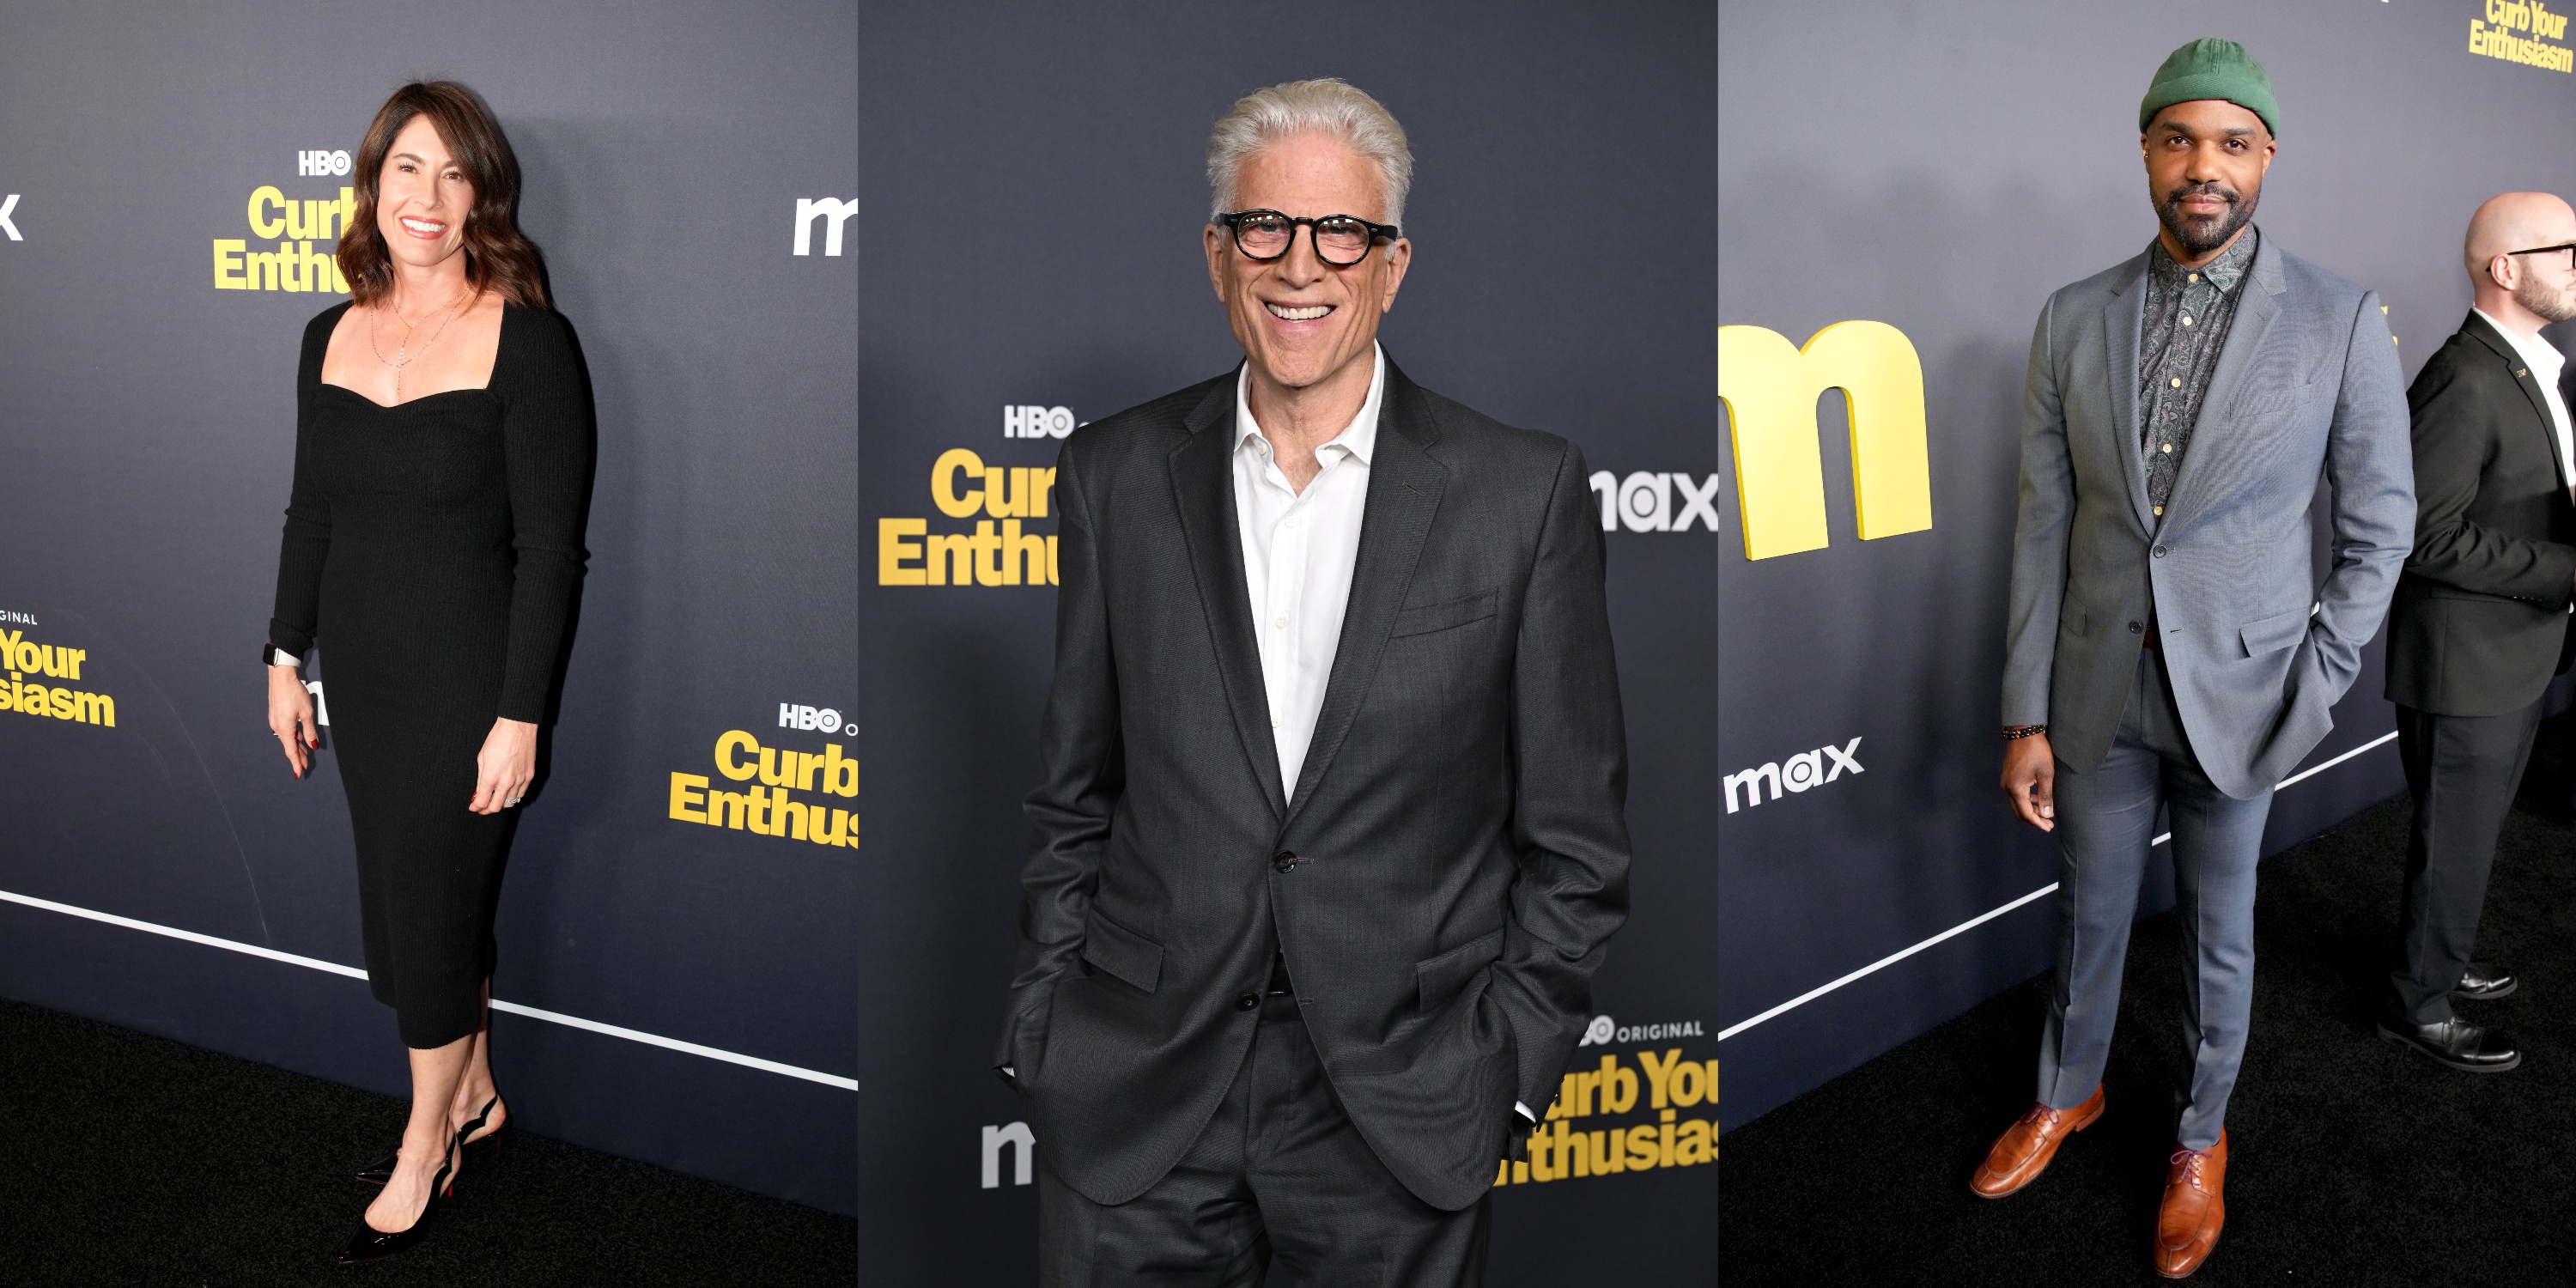 Laura Streicher, Ted Danson, and Carl Clemons-Hopkins smile at the Curb Your Enthusiasm Season 12 premiere